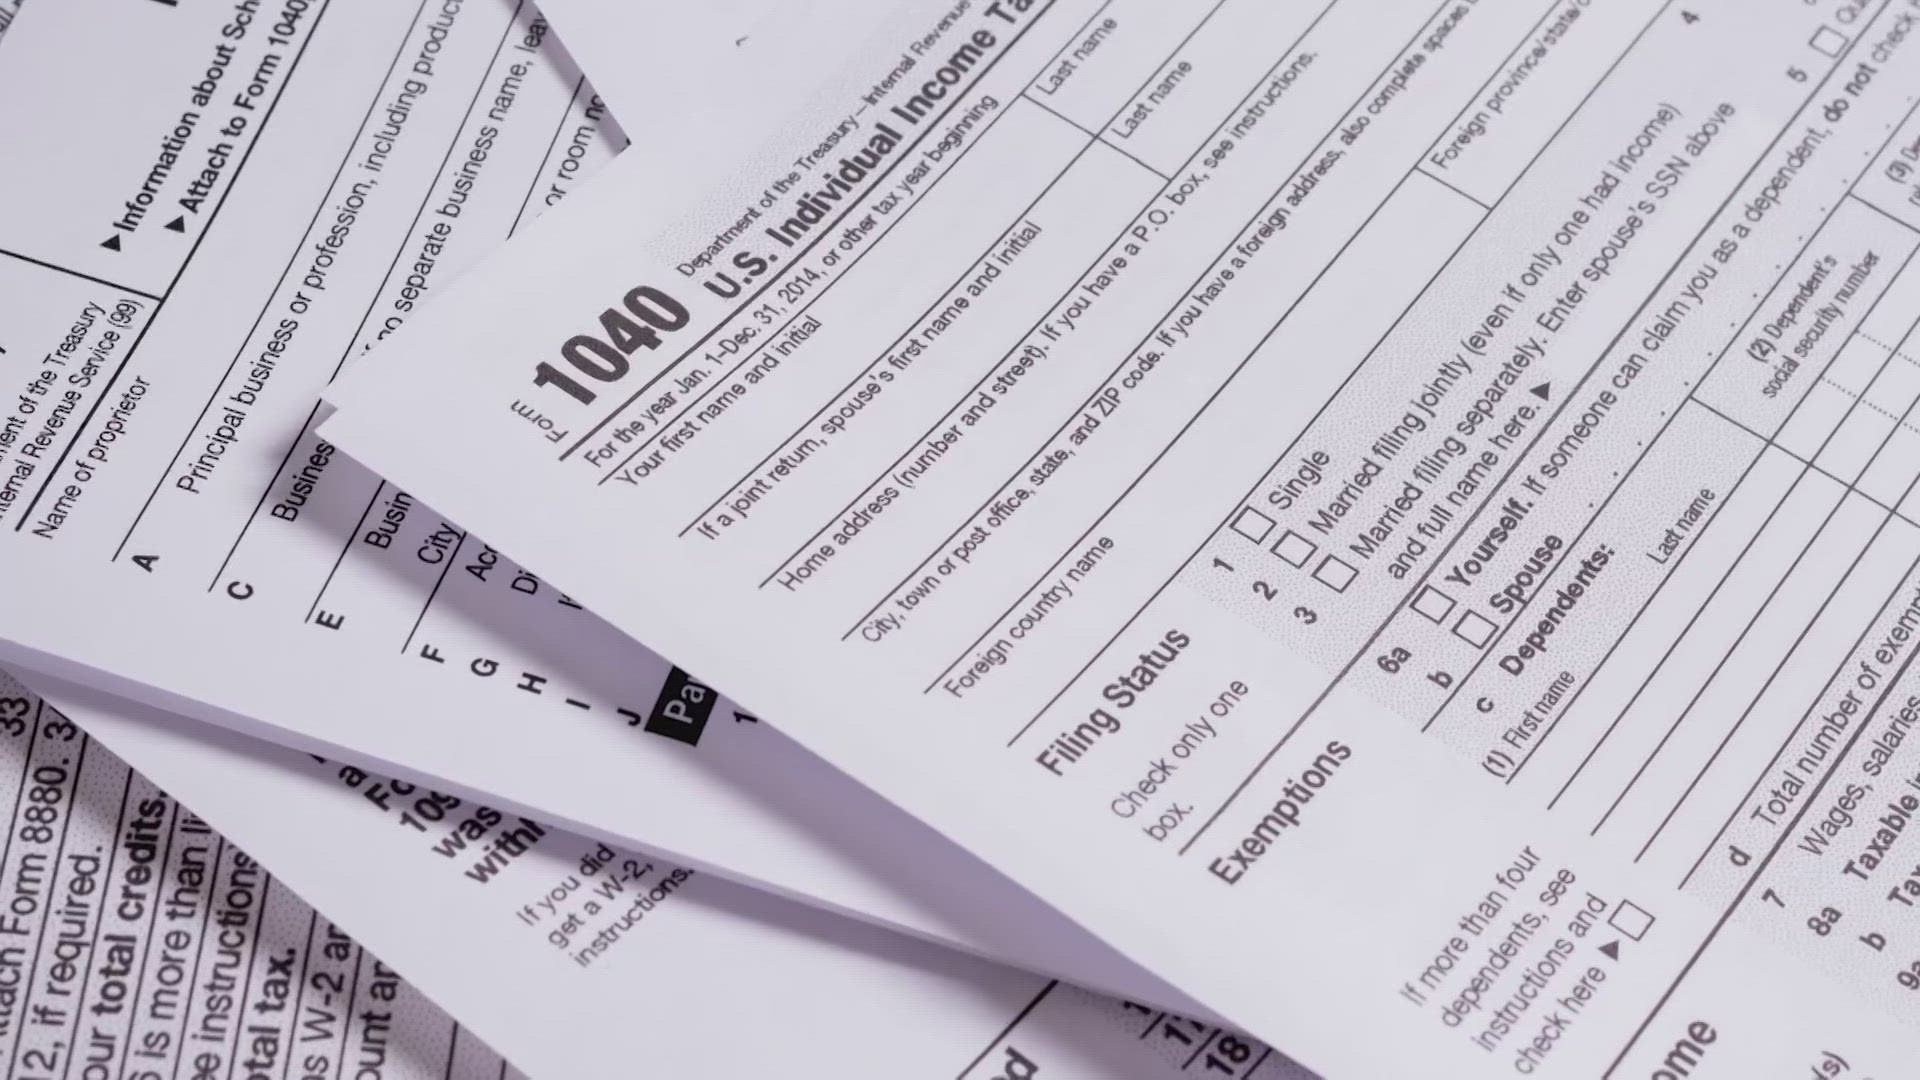 KHOU 11's Grace White spoke with an expert to find out how you can protect yourself from potential scams this tax season.